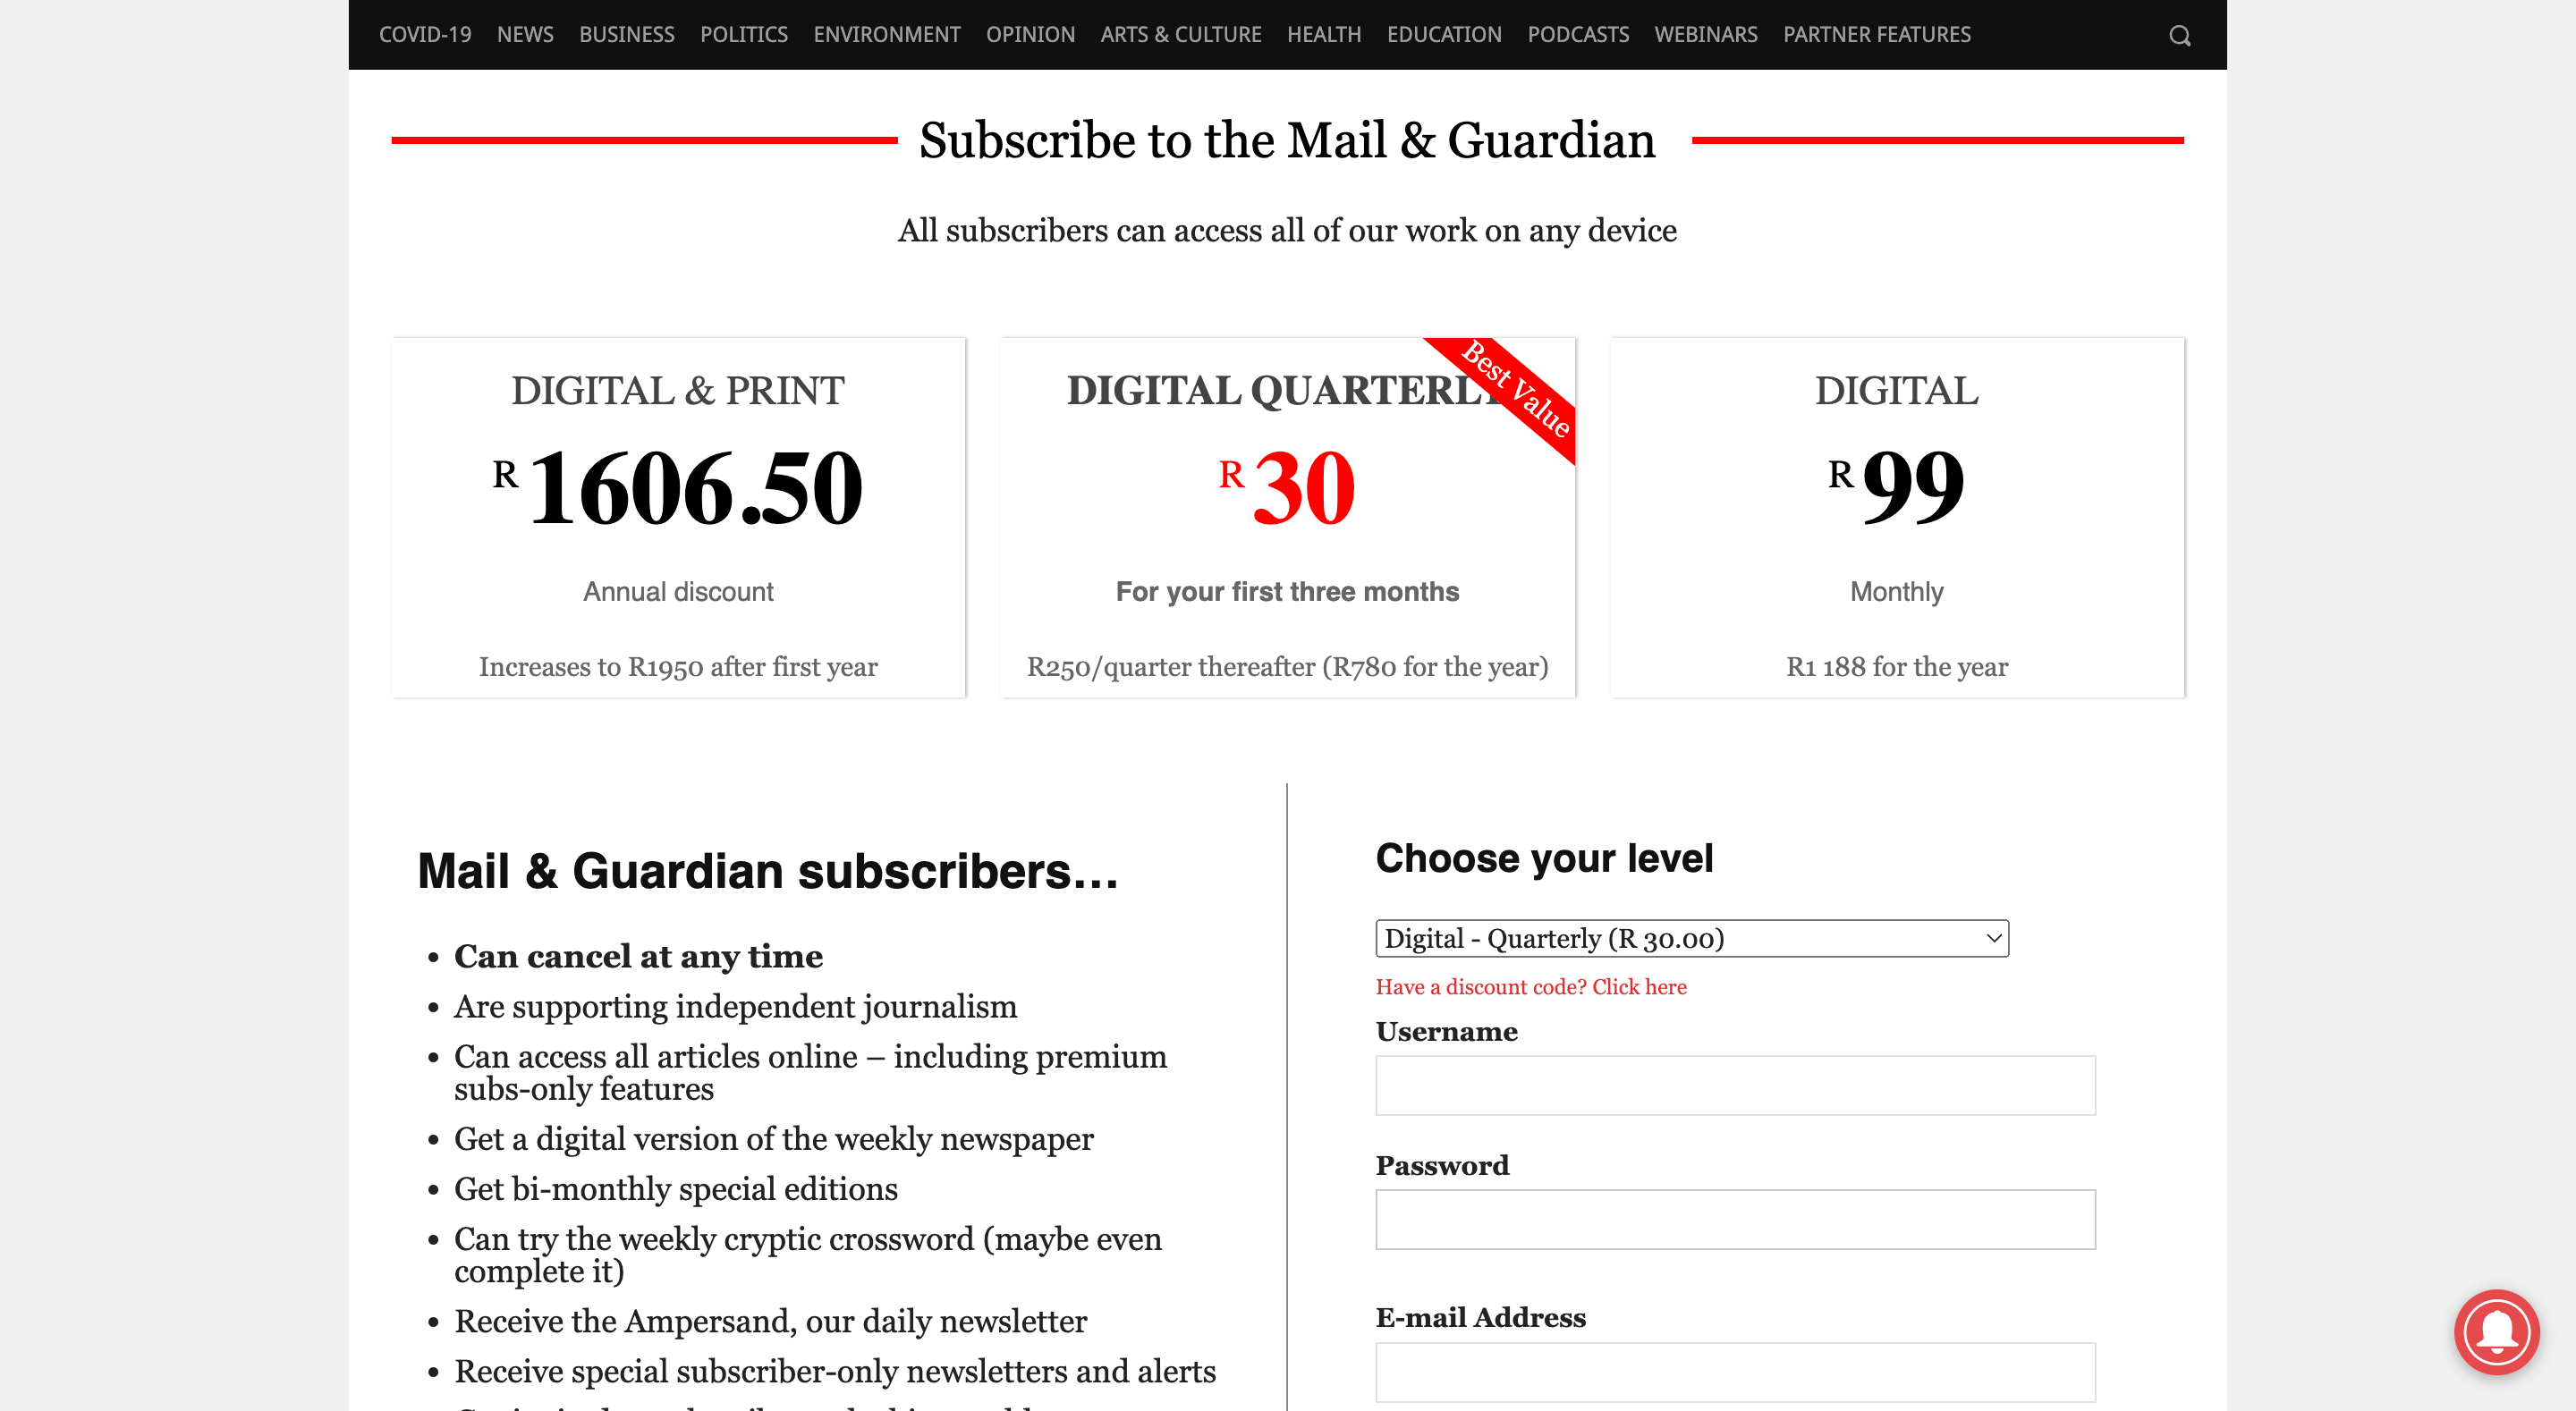 The Mail & Guardian Membership Levels and Pricing